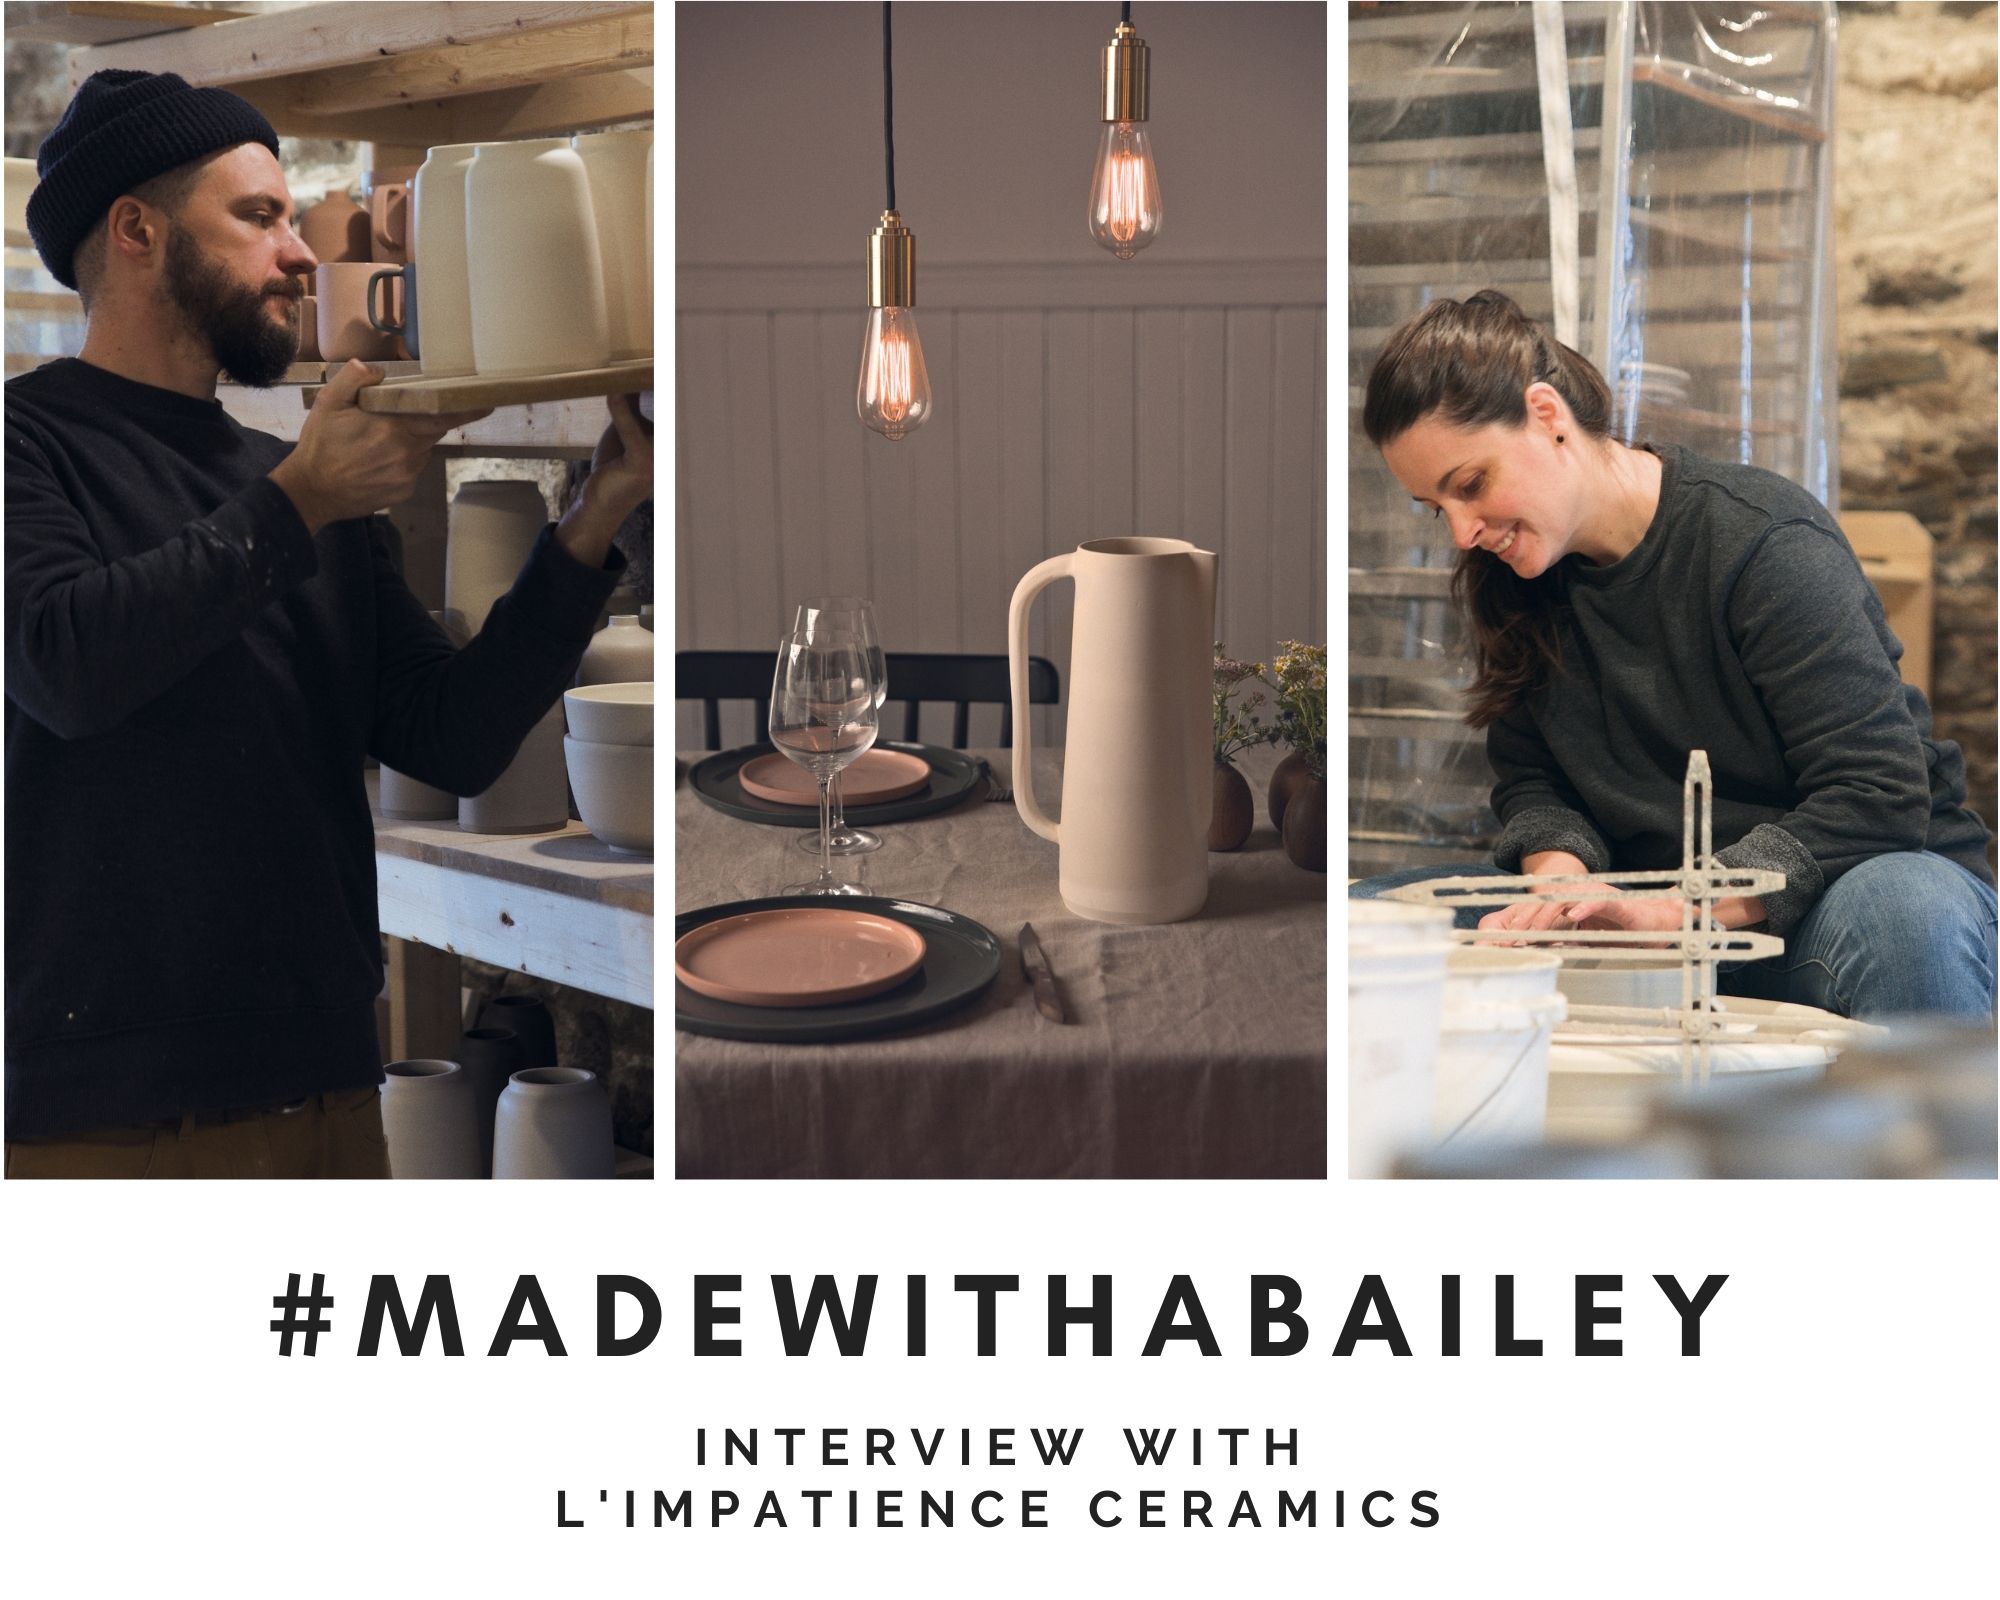 Made with a Bailey Interview featuring L'Impatience Ceramics